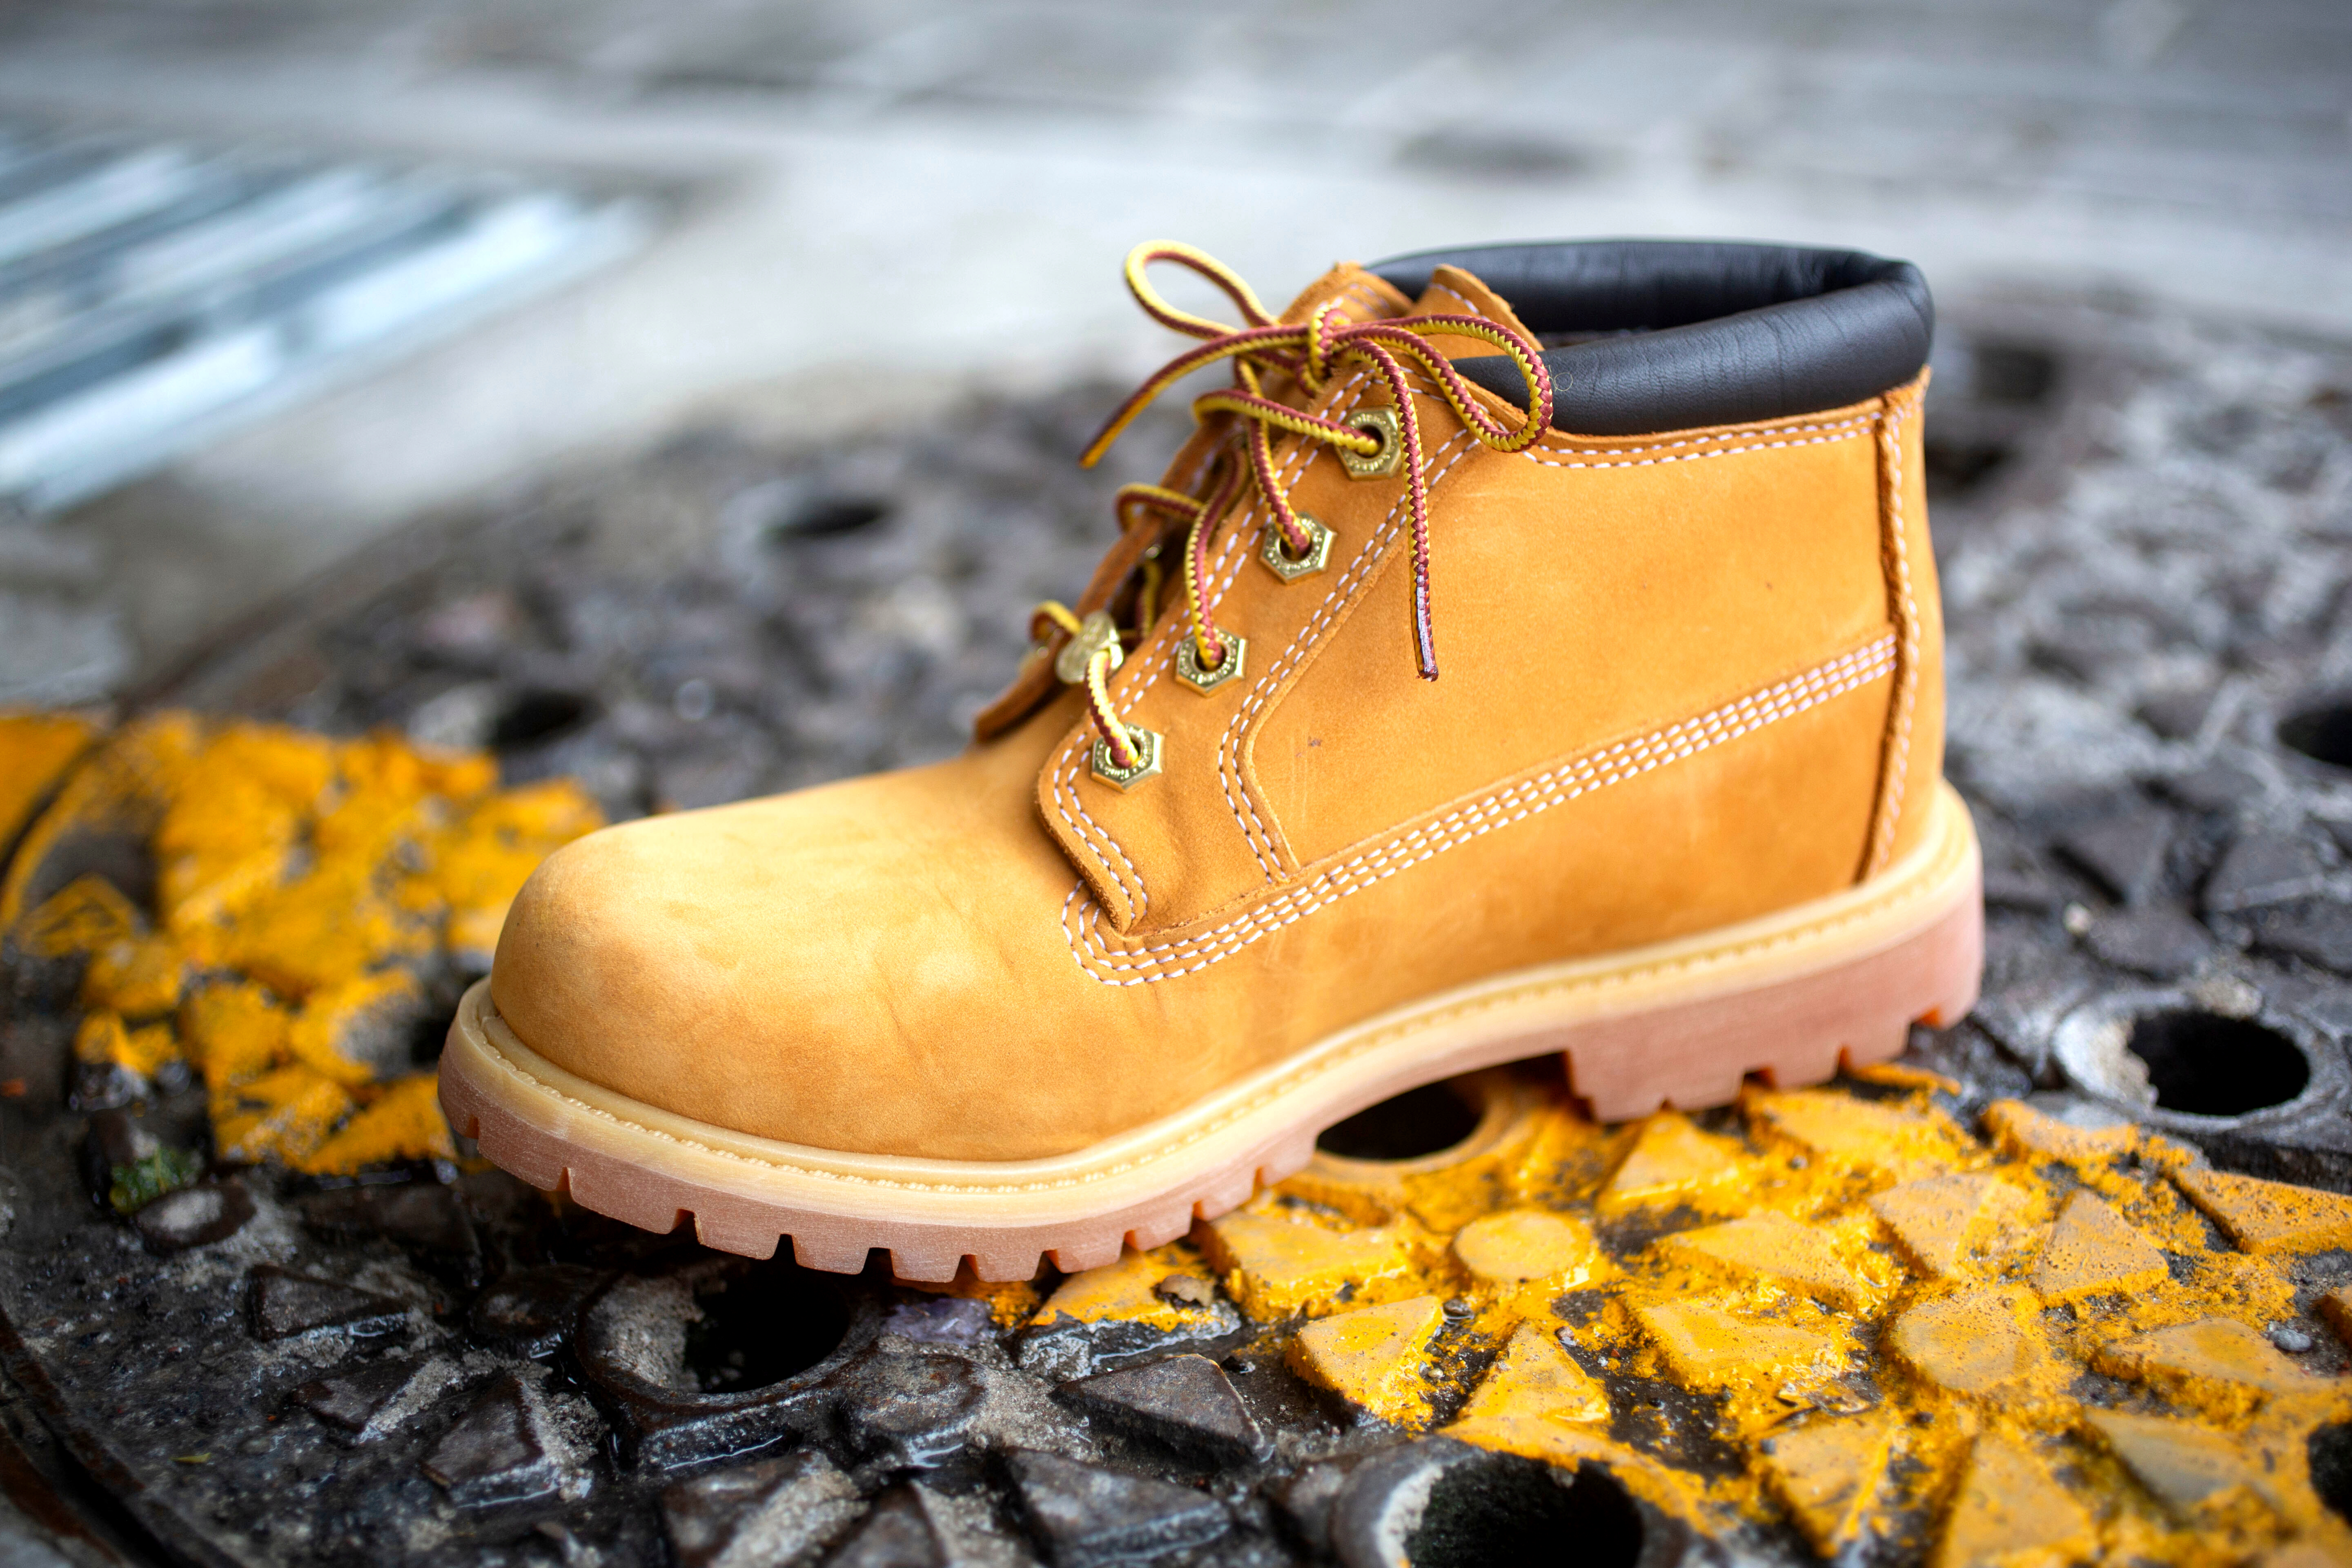 How to Clean Timberland Boots With Vinegar